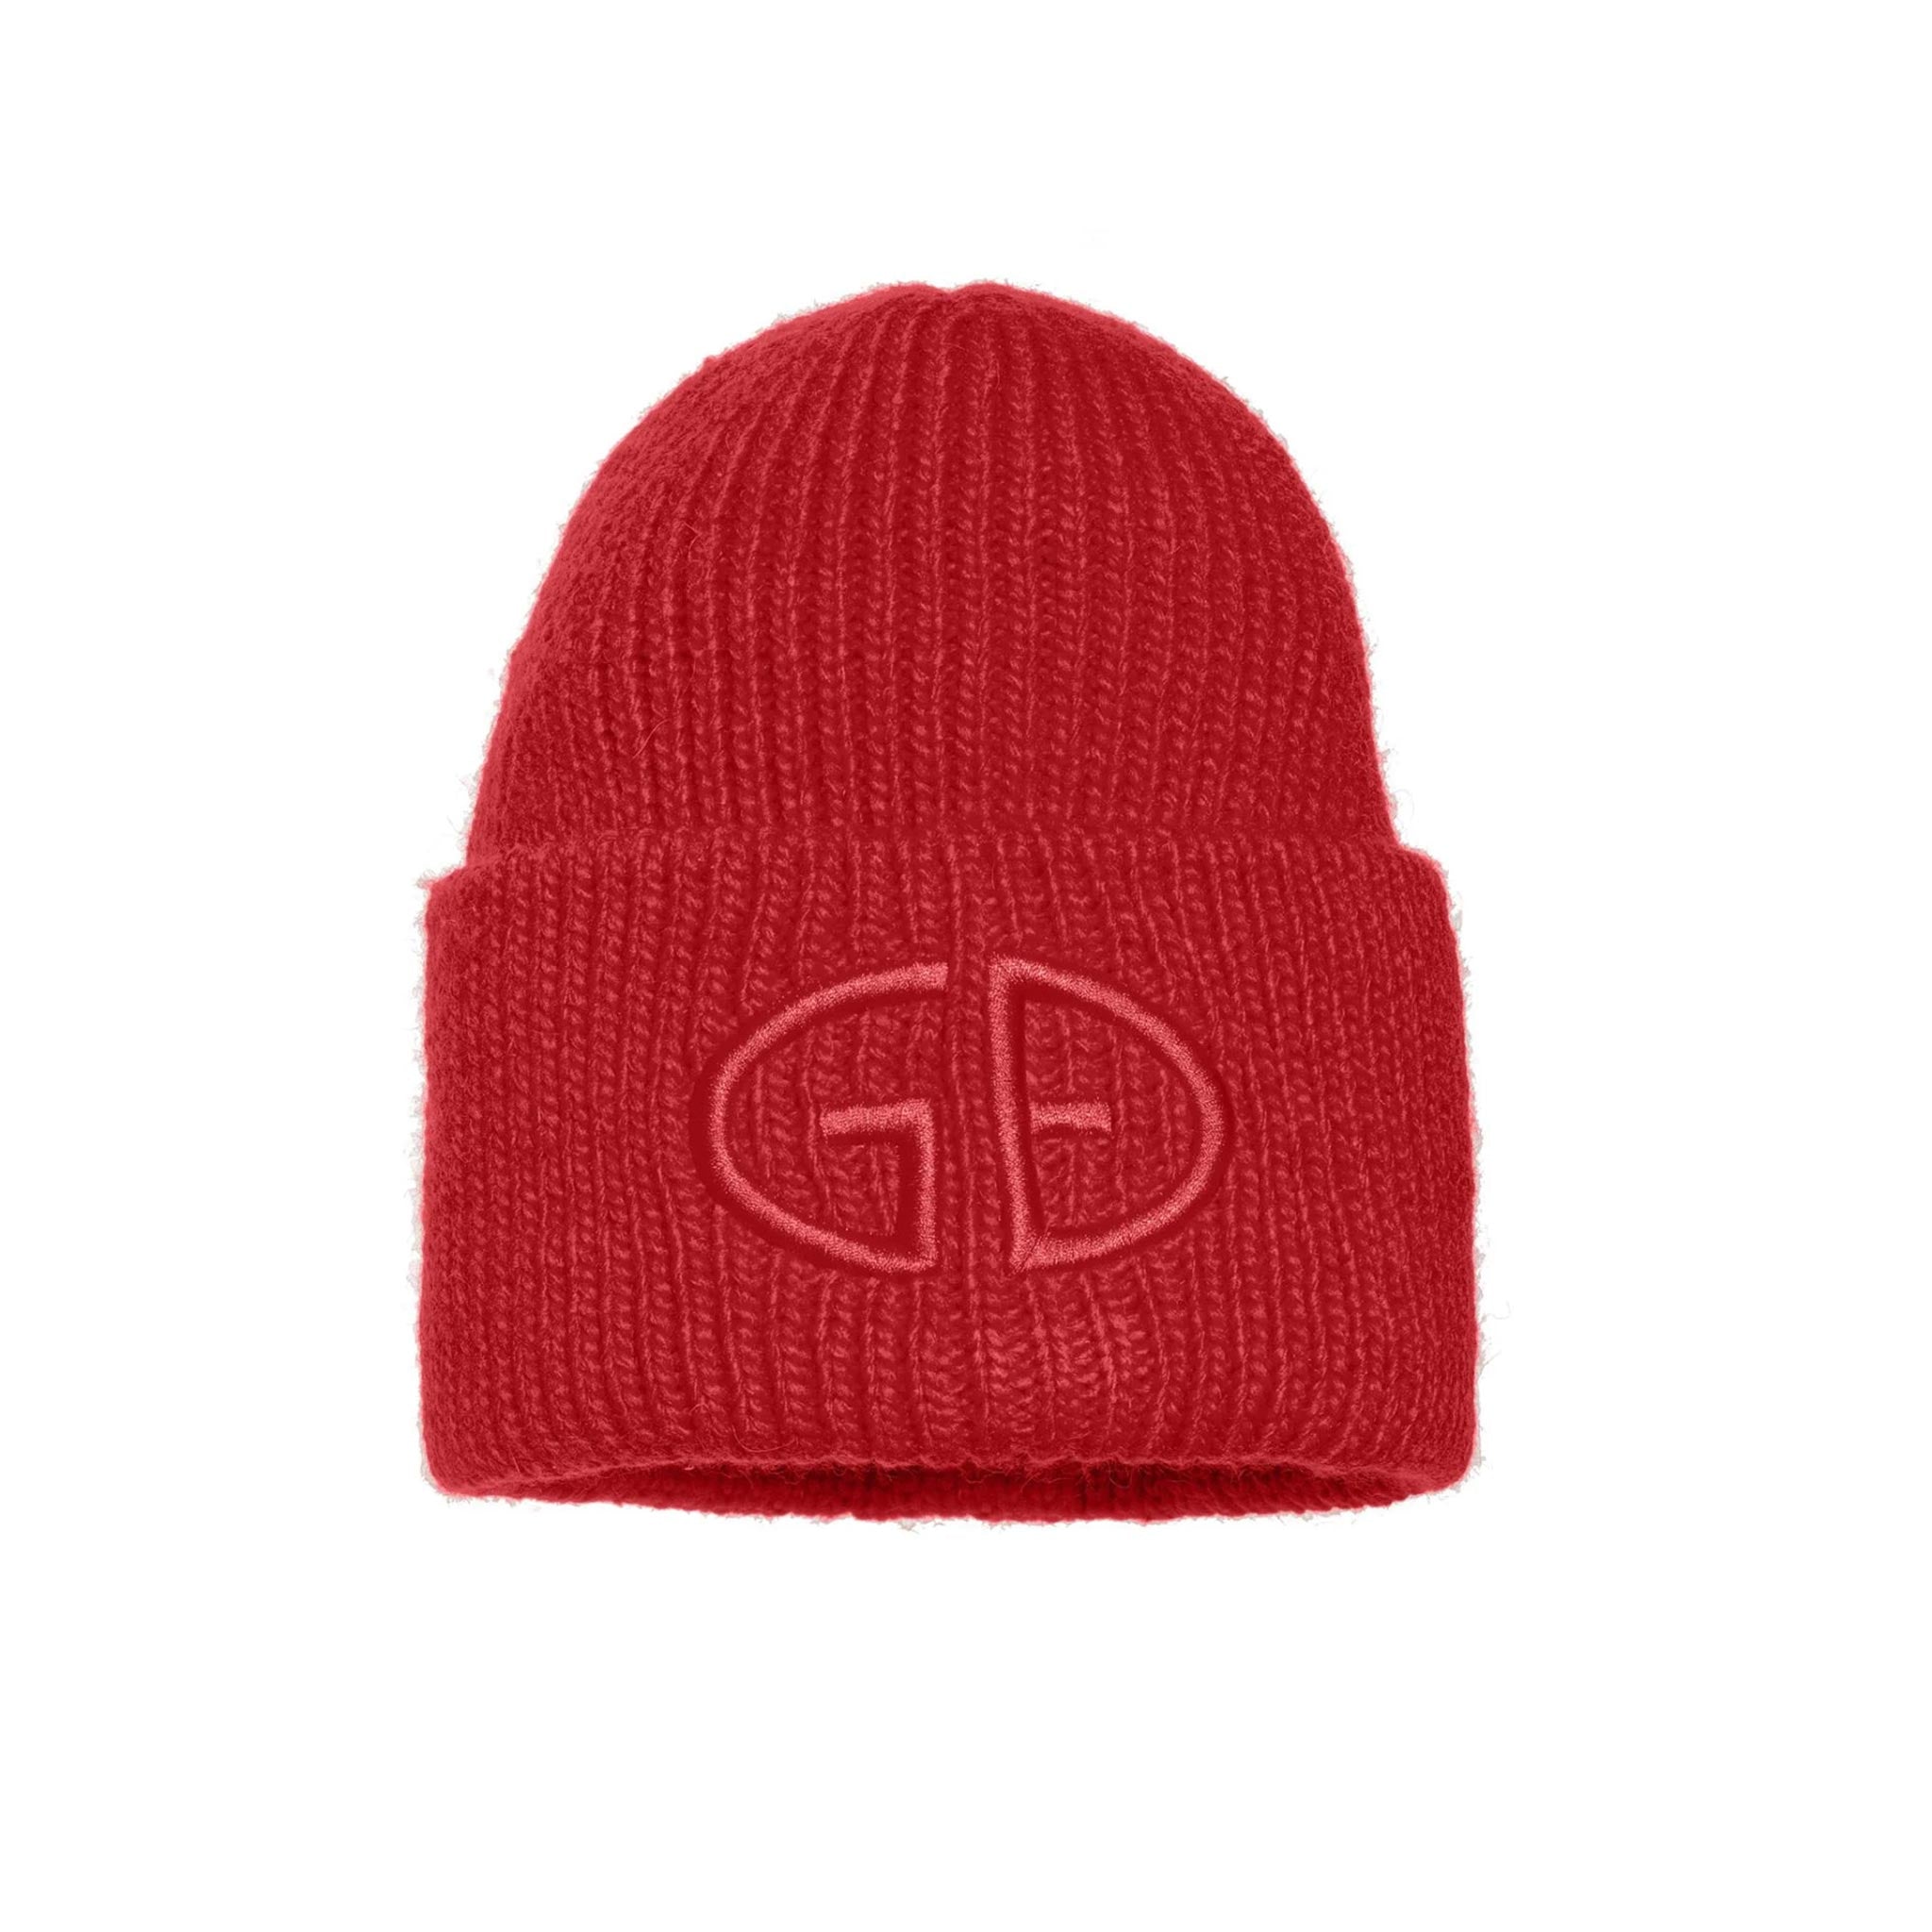 Valerie Beanie in Flame Red